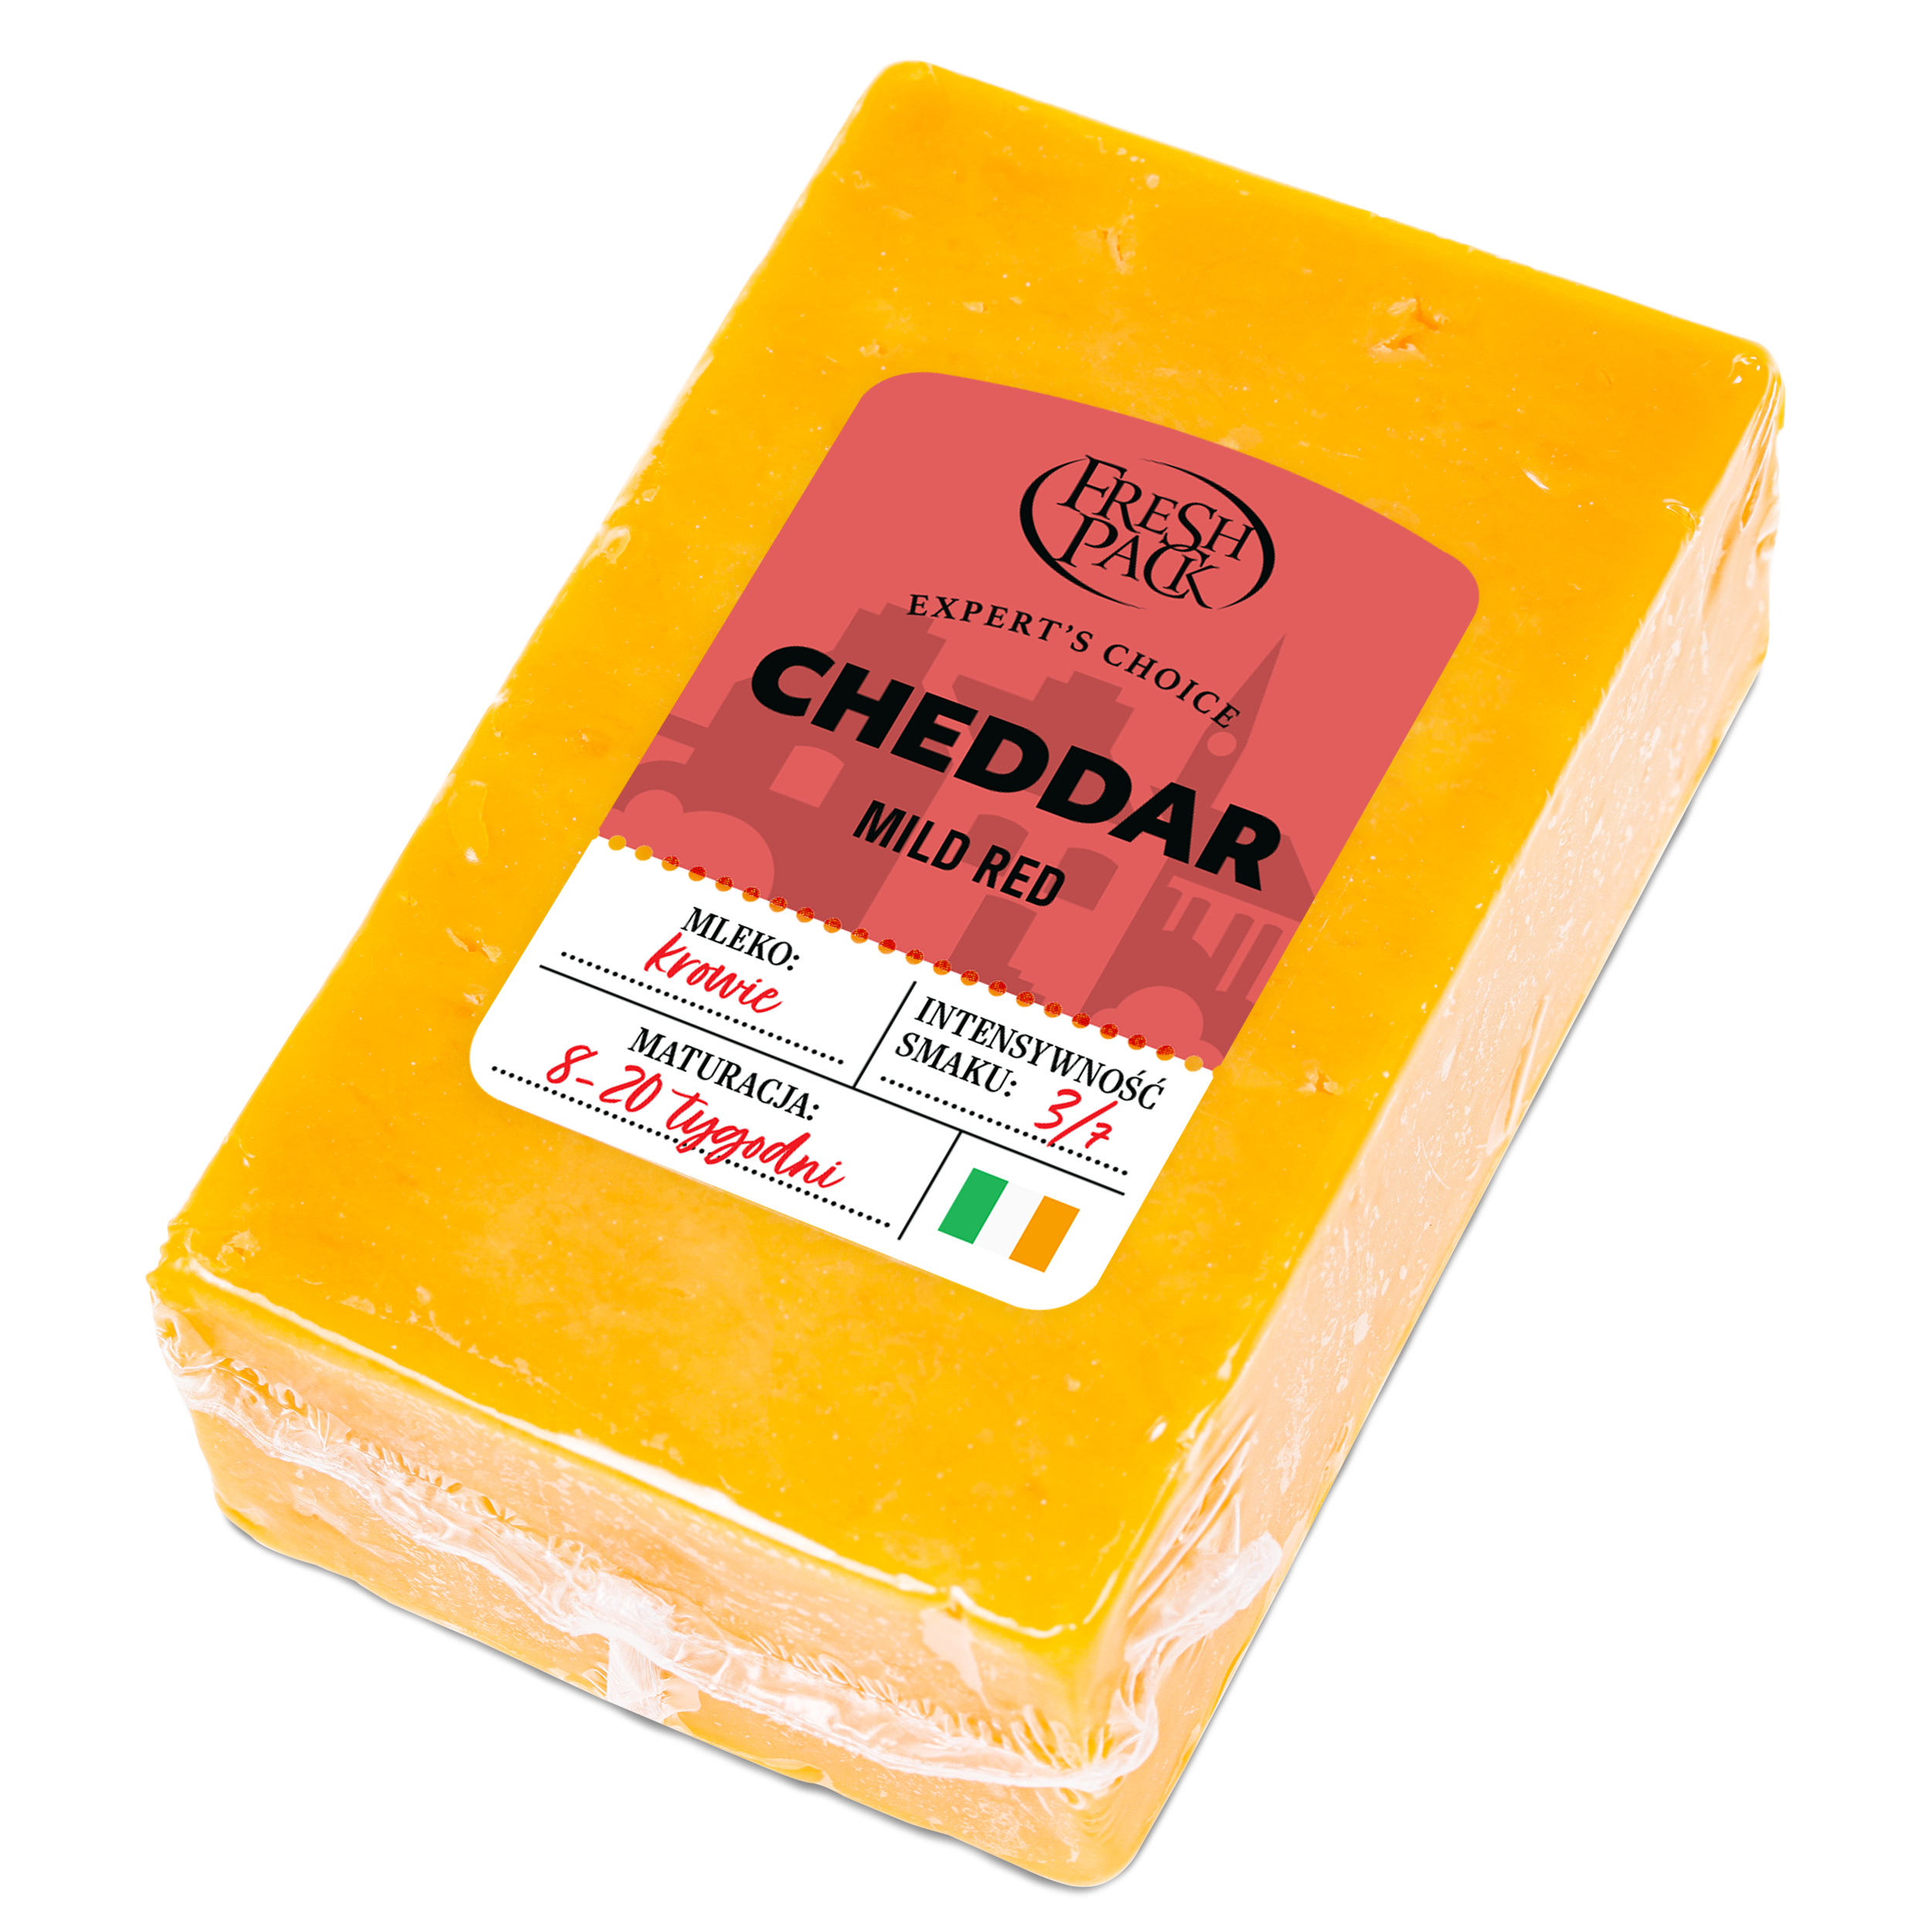 CHEDDAR RED MILD CHEESE